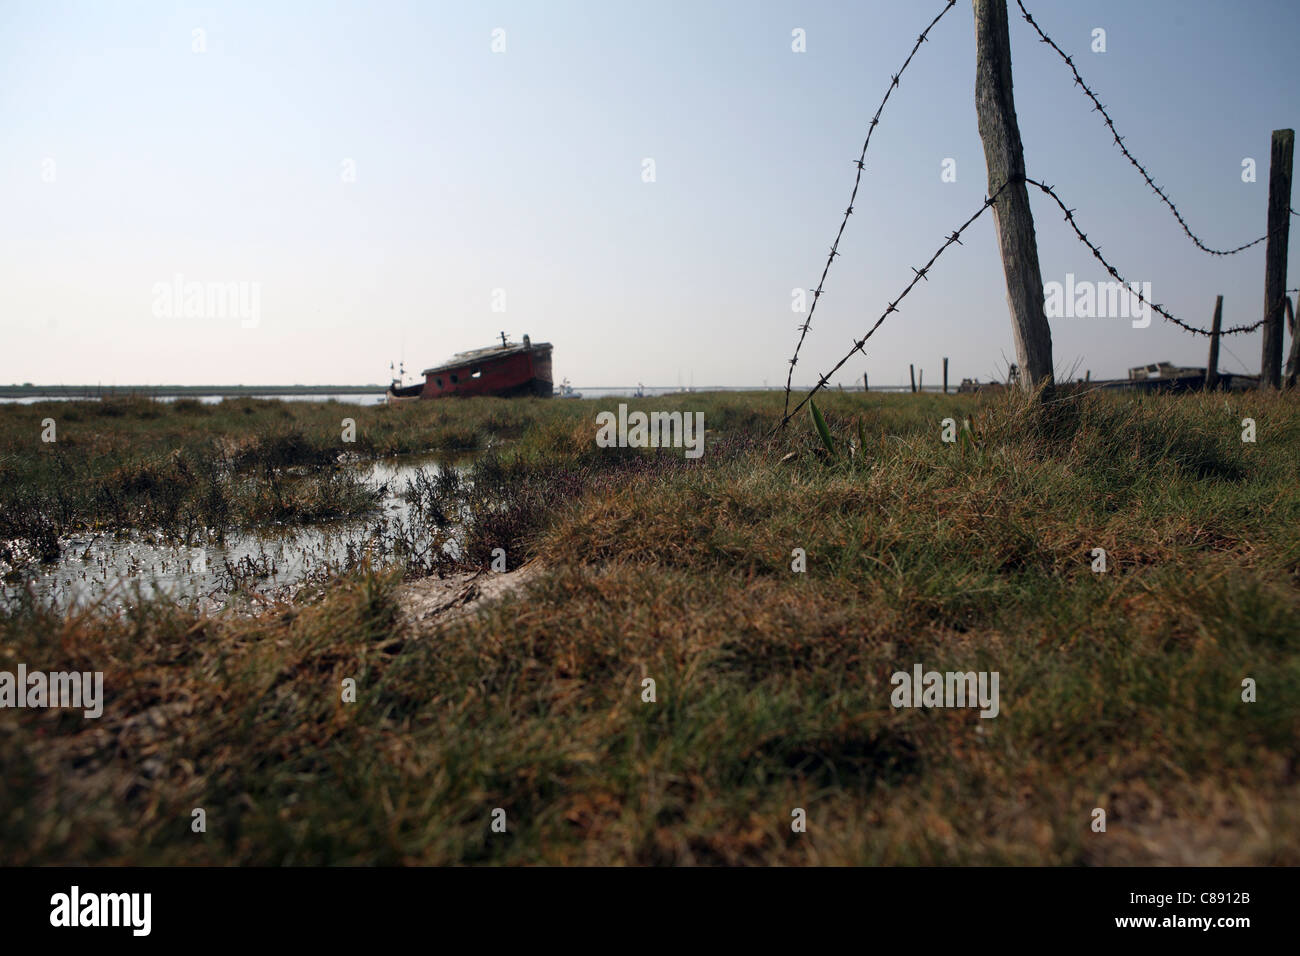 River Ore / Alde, bank / wall at Orford Suffolk, UK showing abandoned boats in background Stock Photo